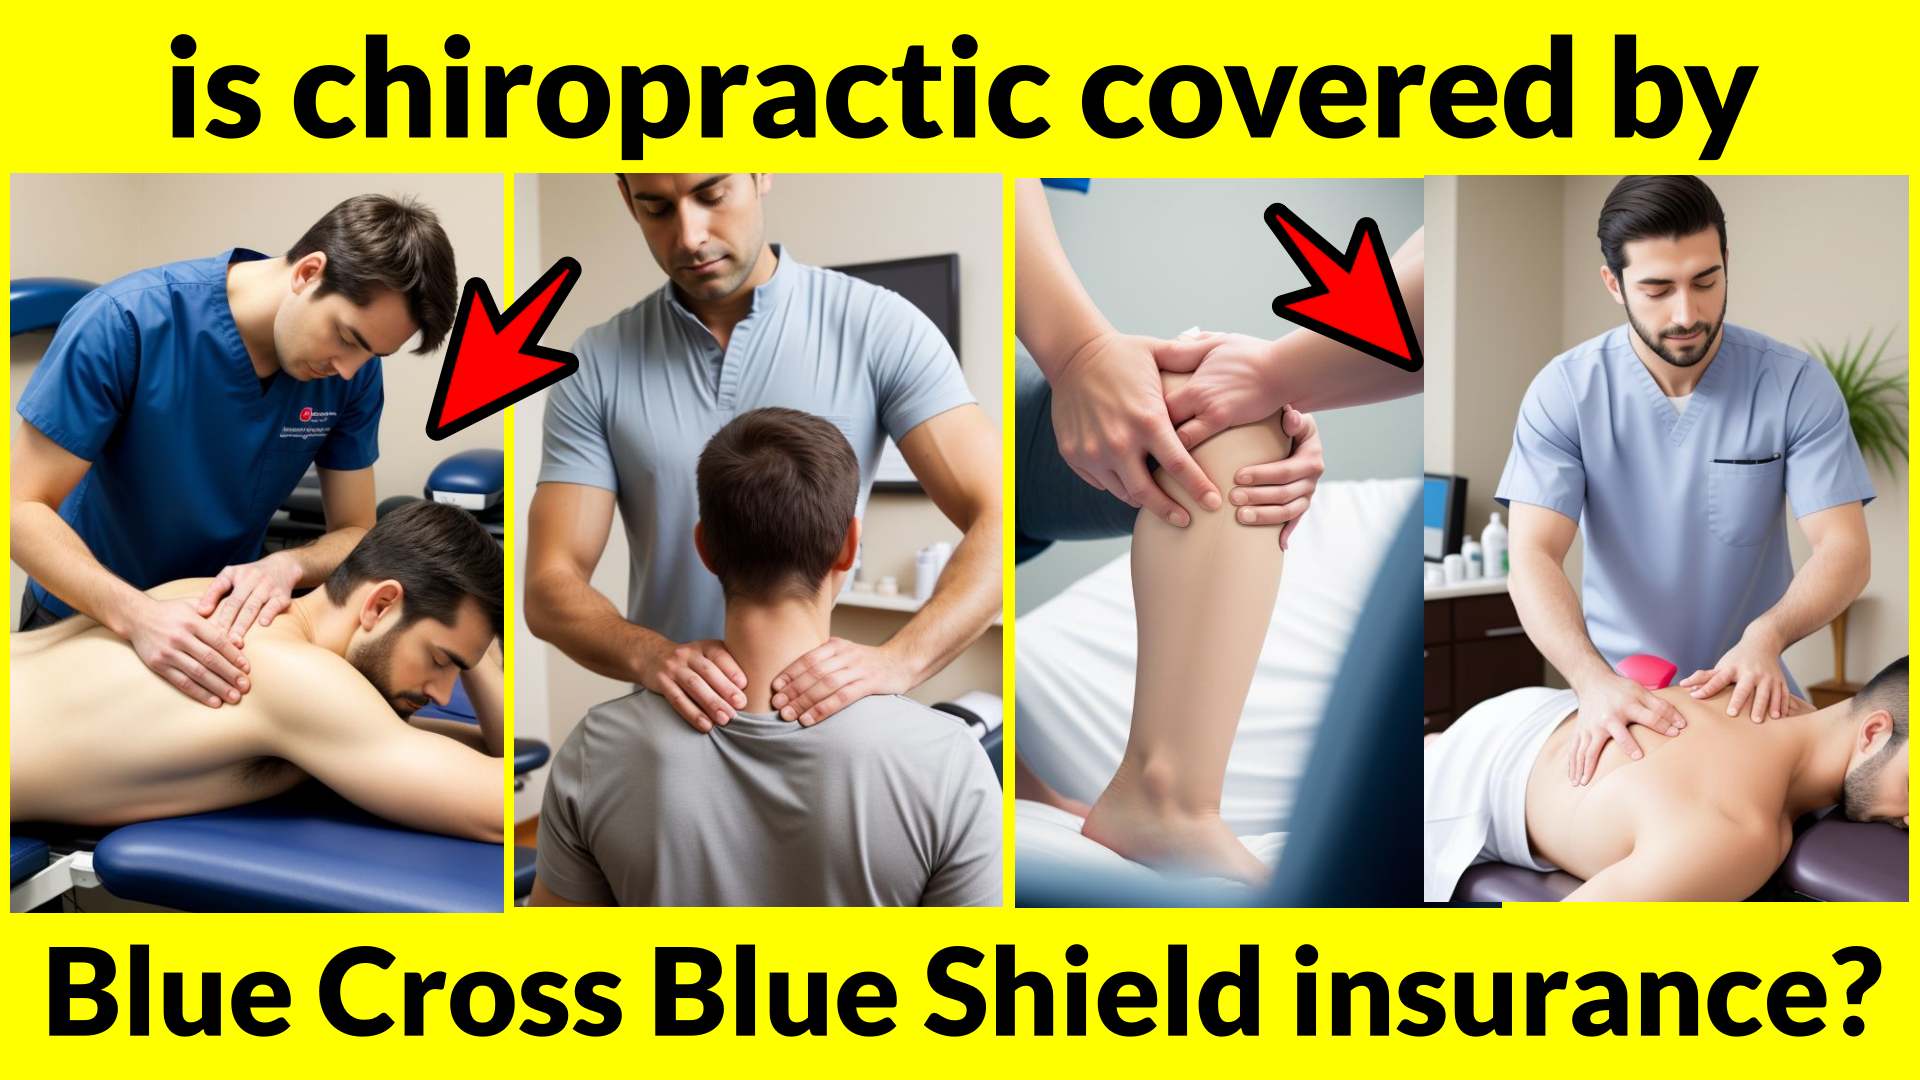 Is chiropractic covered by Blue Cross Blue Shield insurance